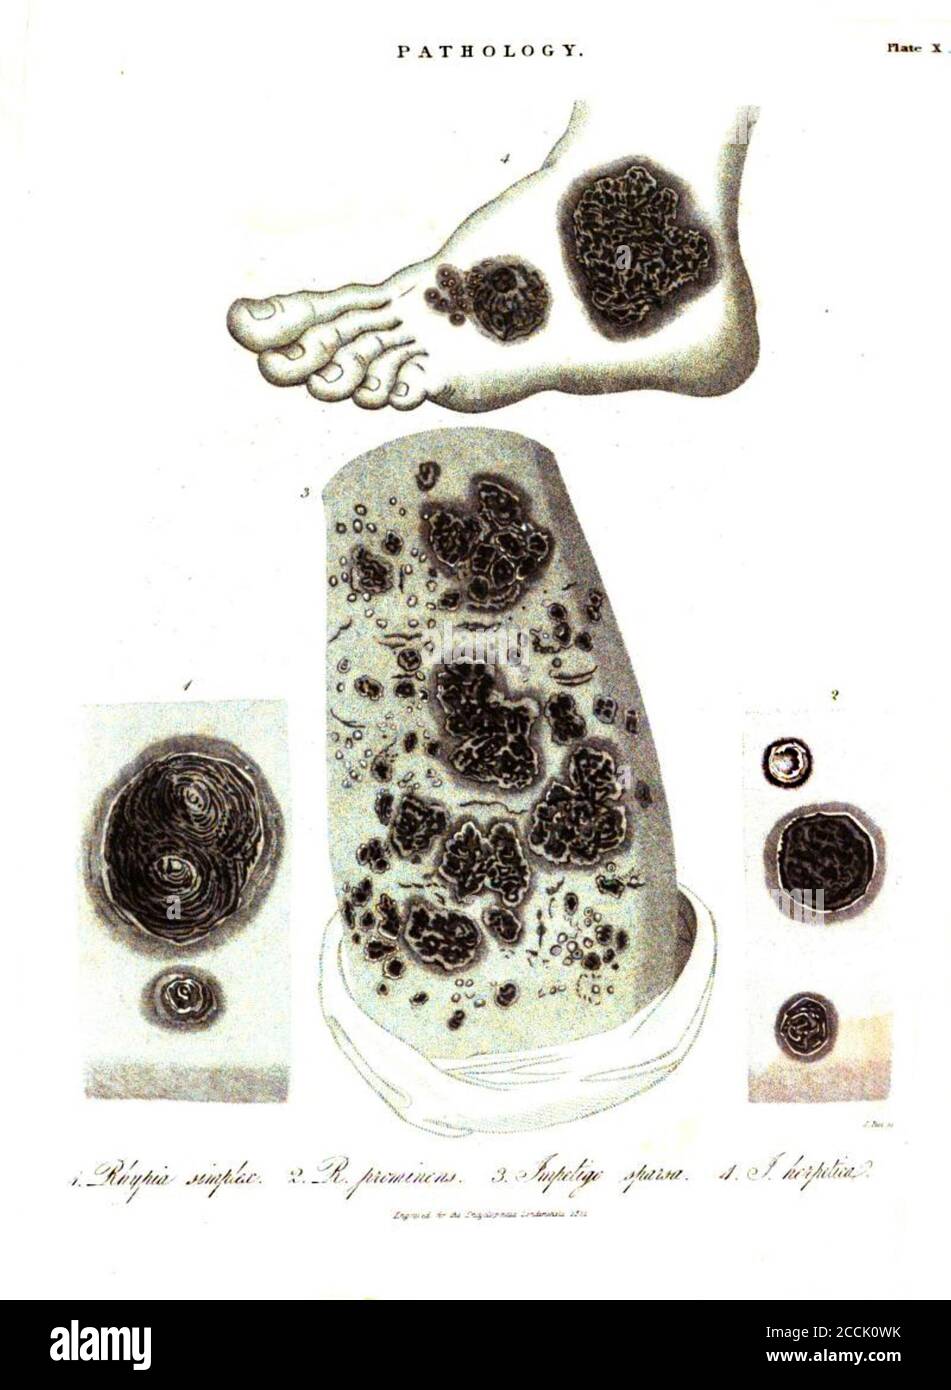 Illustration of a pathological skin disease caused by bacterial infection (Impetigo) From the Encyclopaedia Londinensis or, Universal dictionary of arts, sciences, and literature; Volume XIX;  Edited by Wilkes, John. Published in London in 1823 Stock Photo